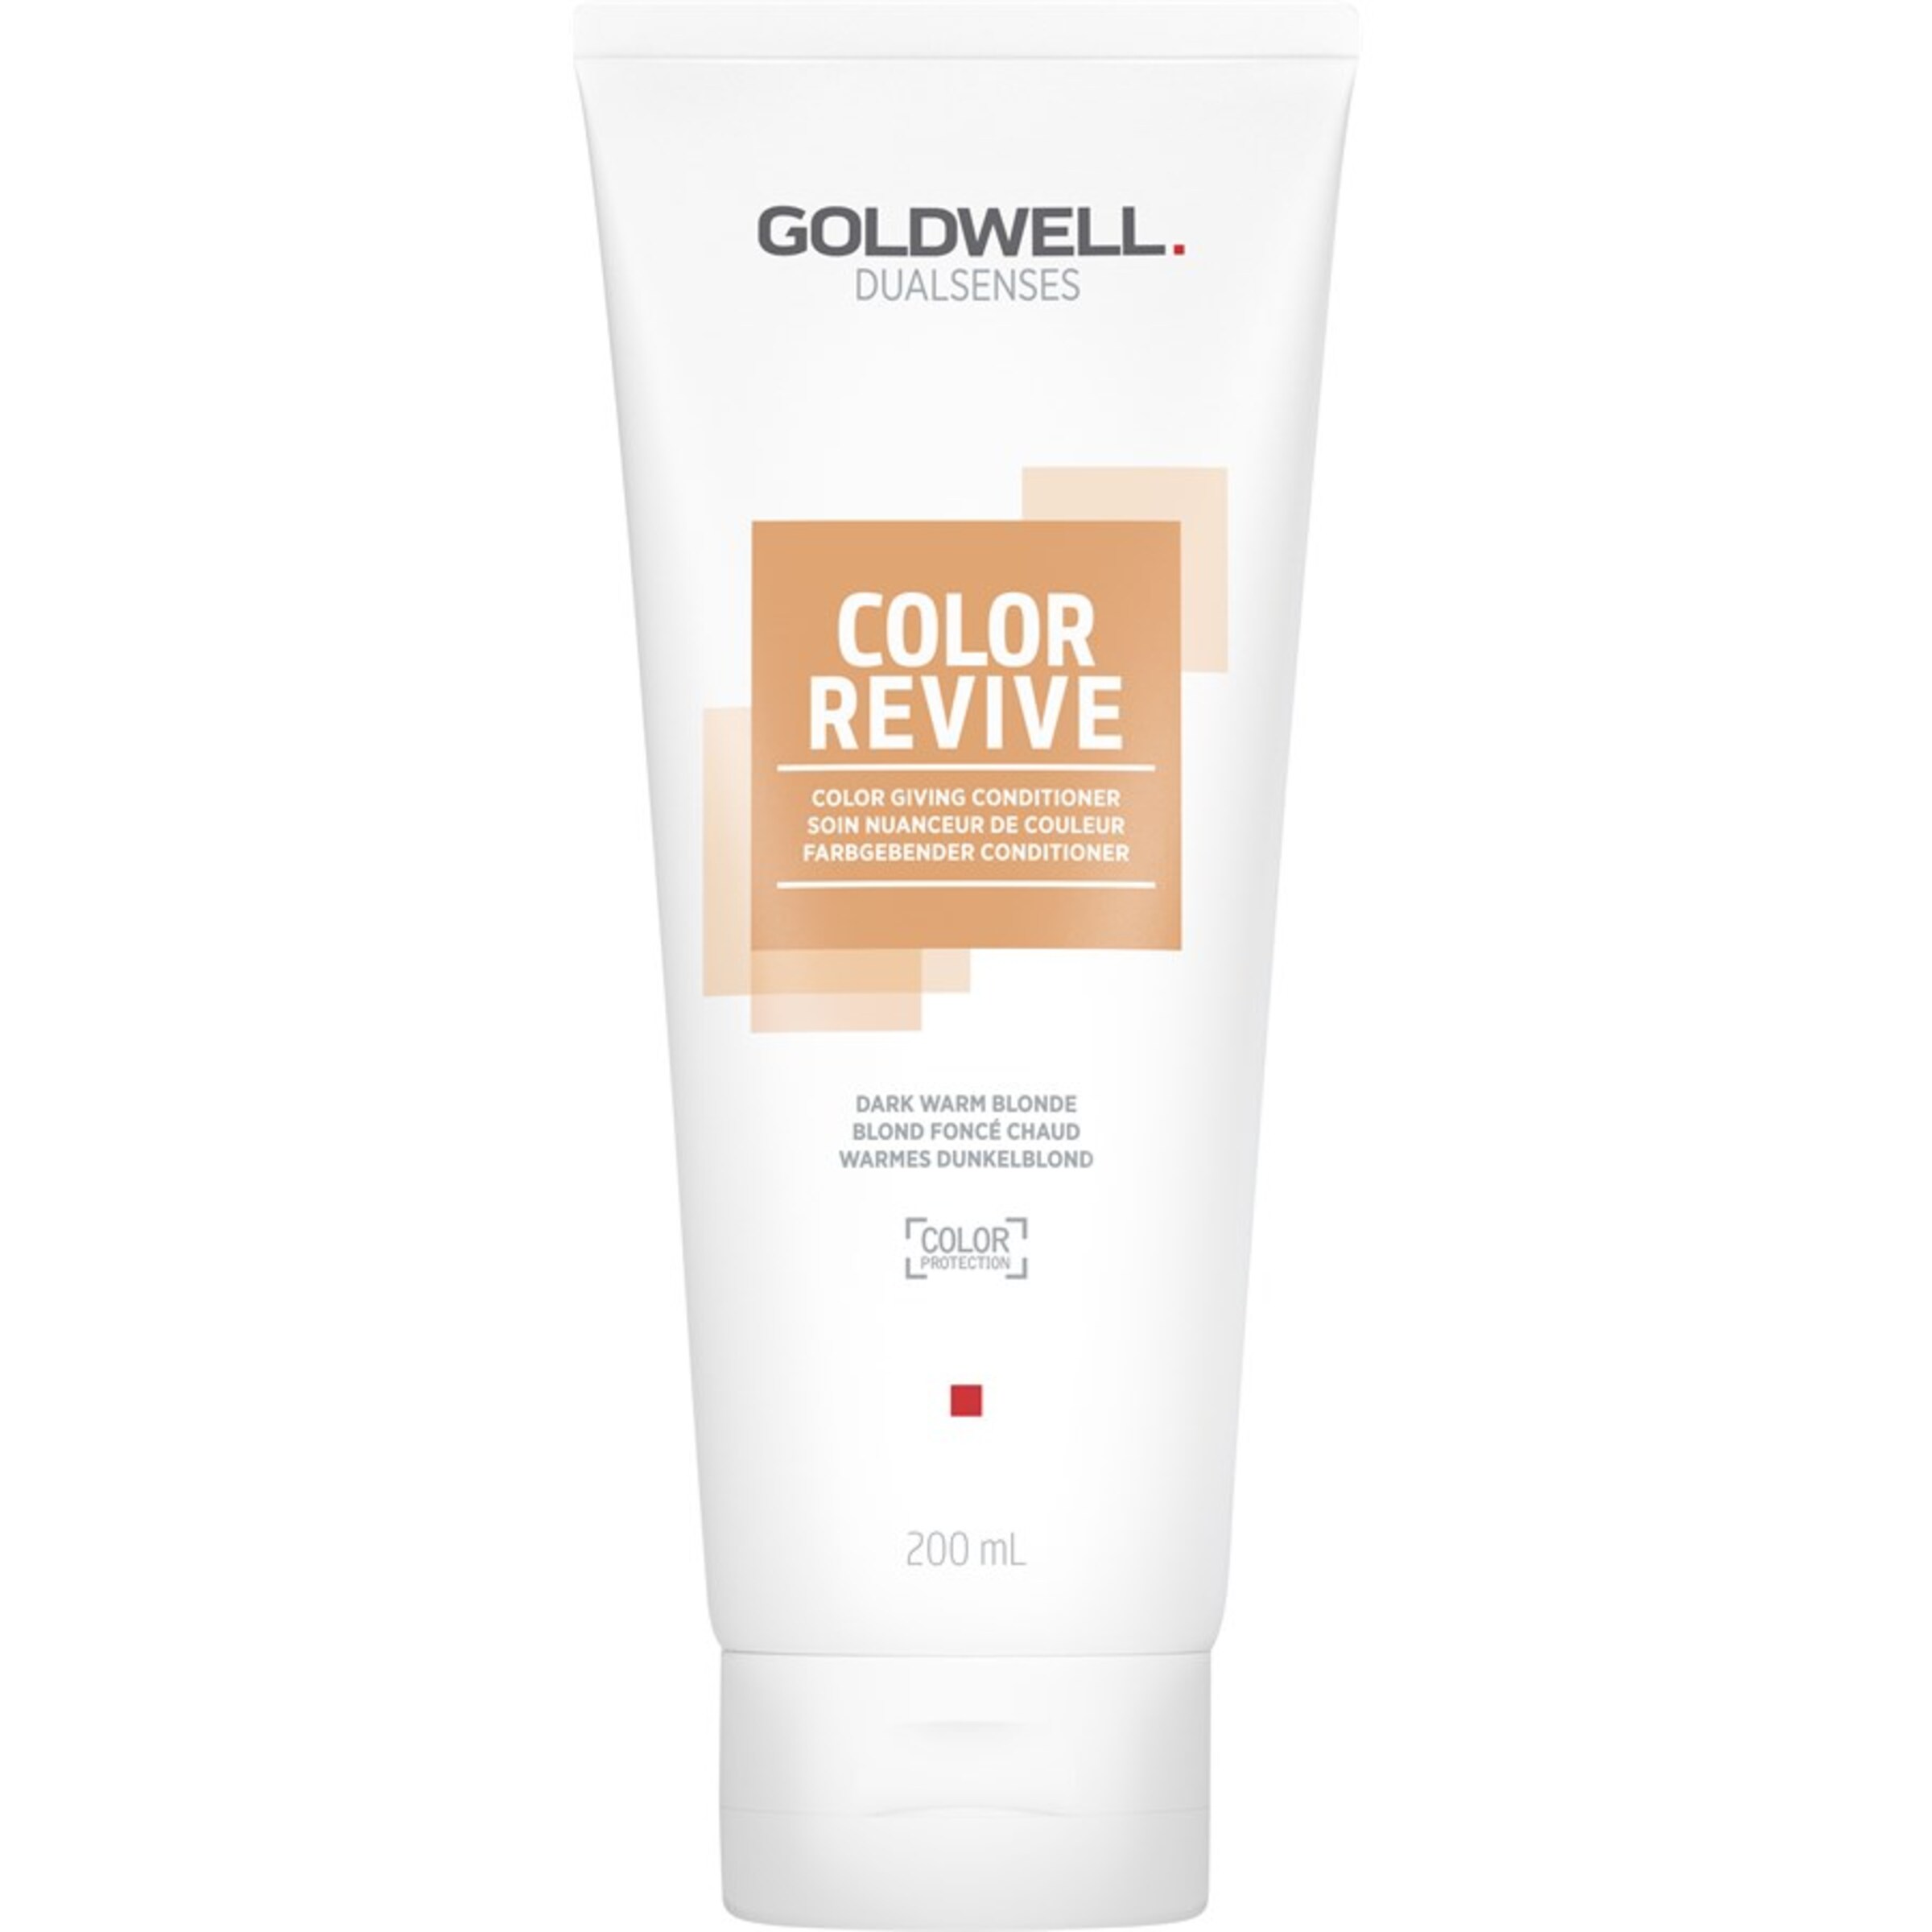 Goldwell Conditioner in 